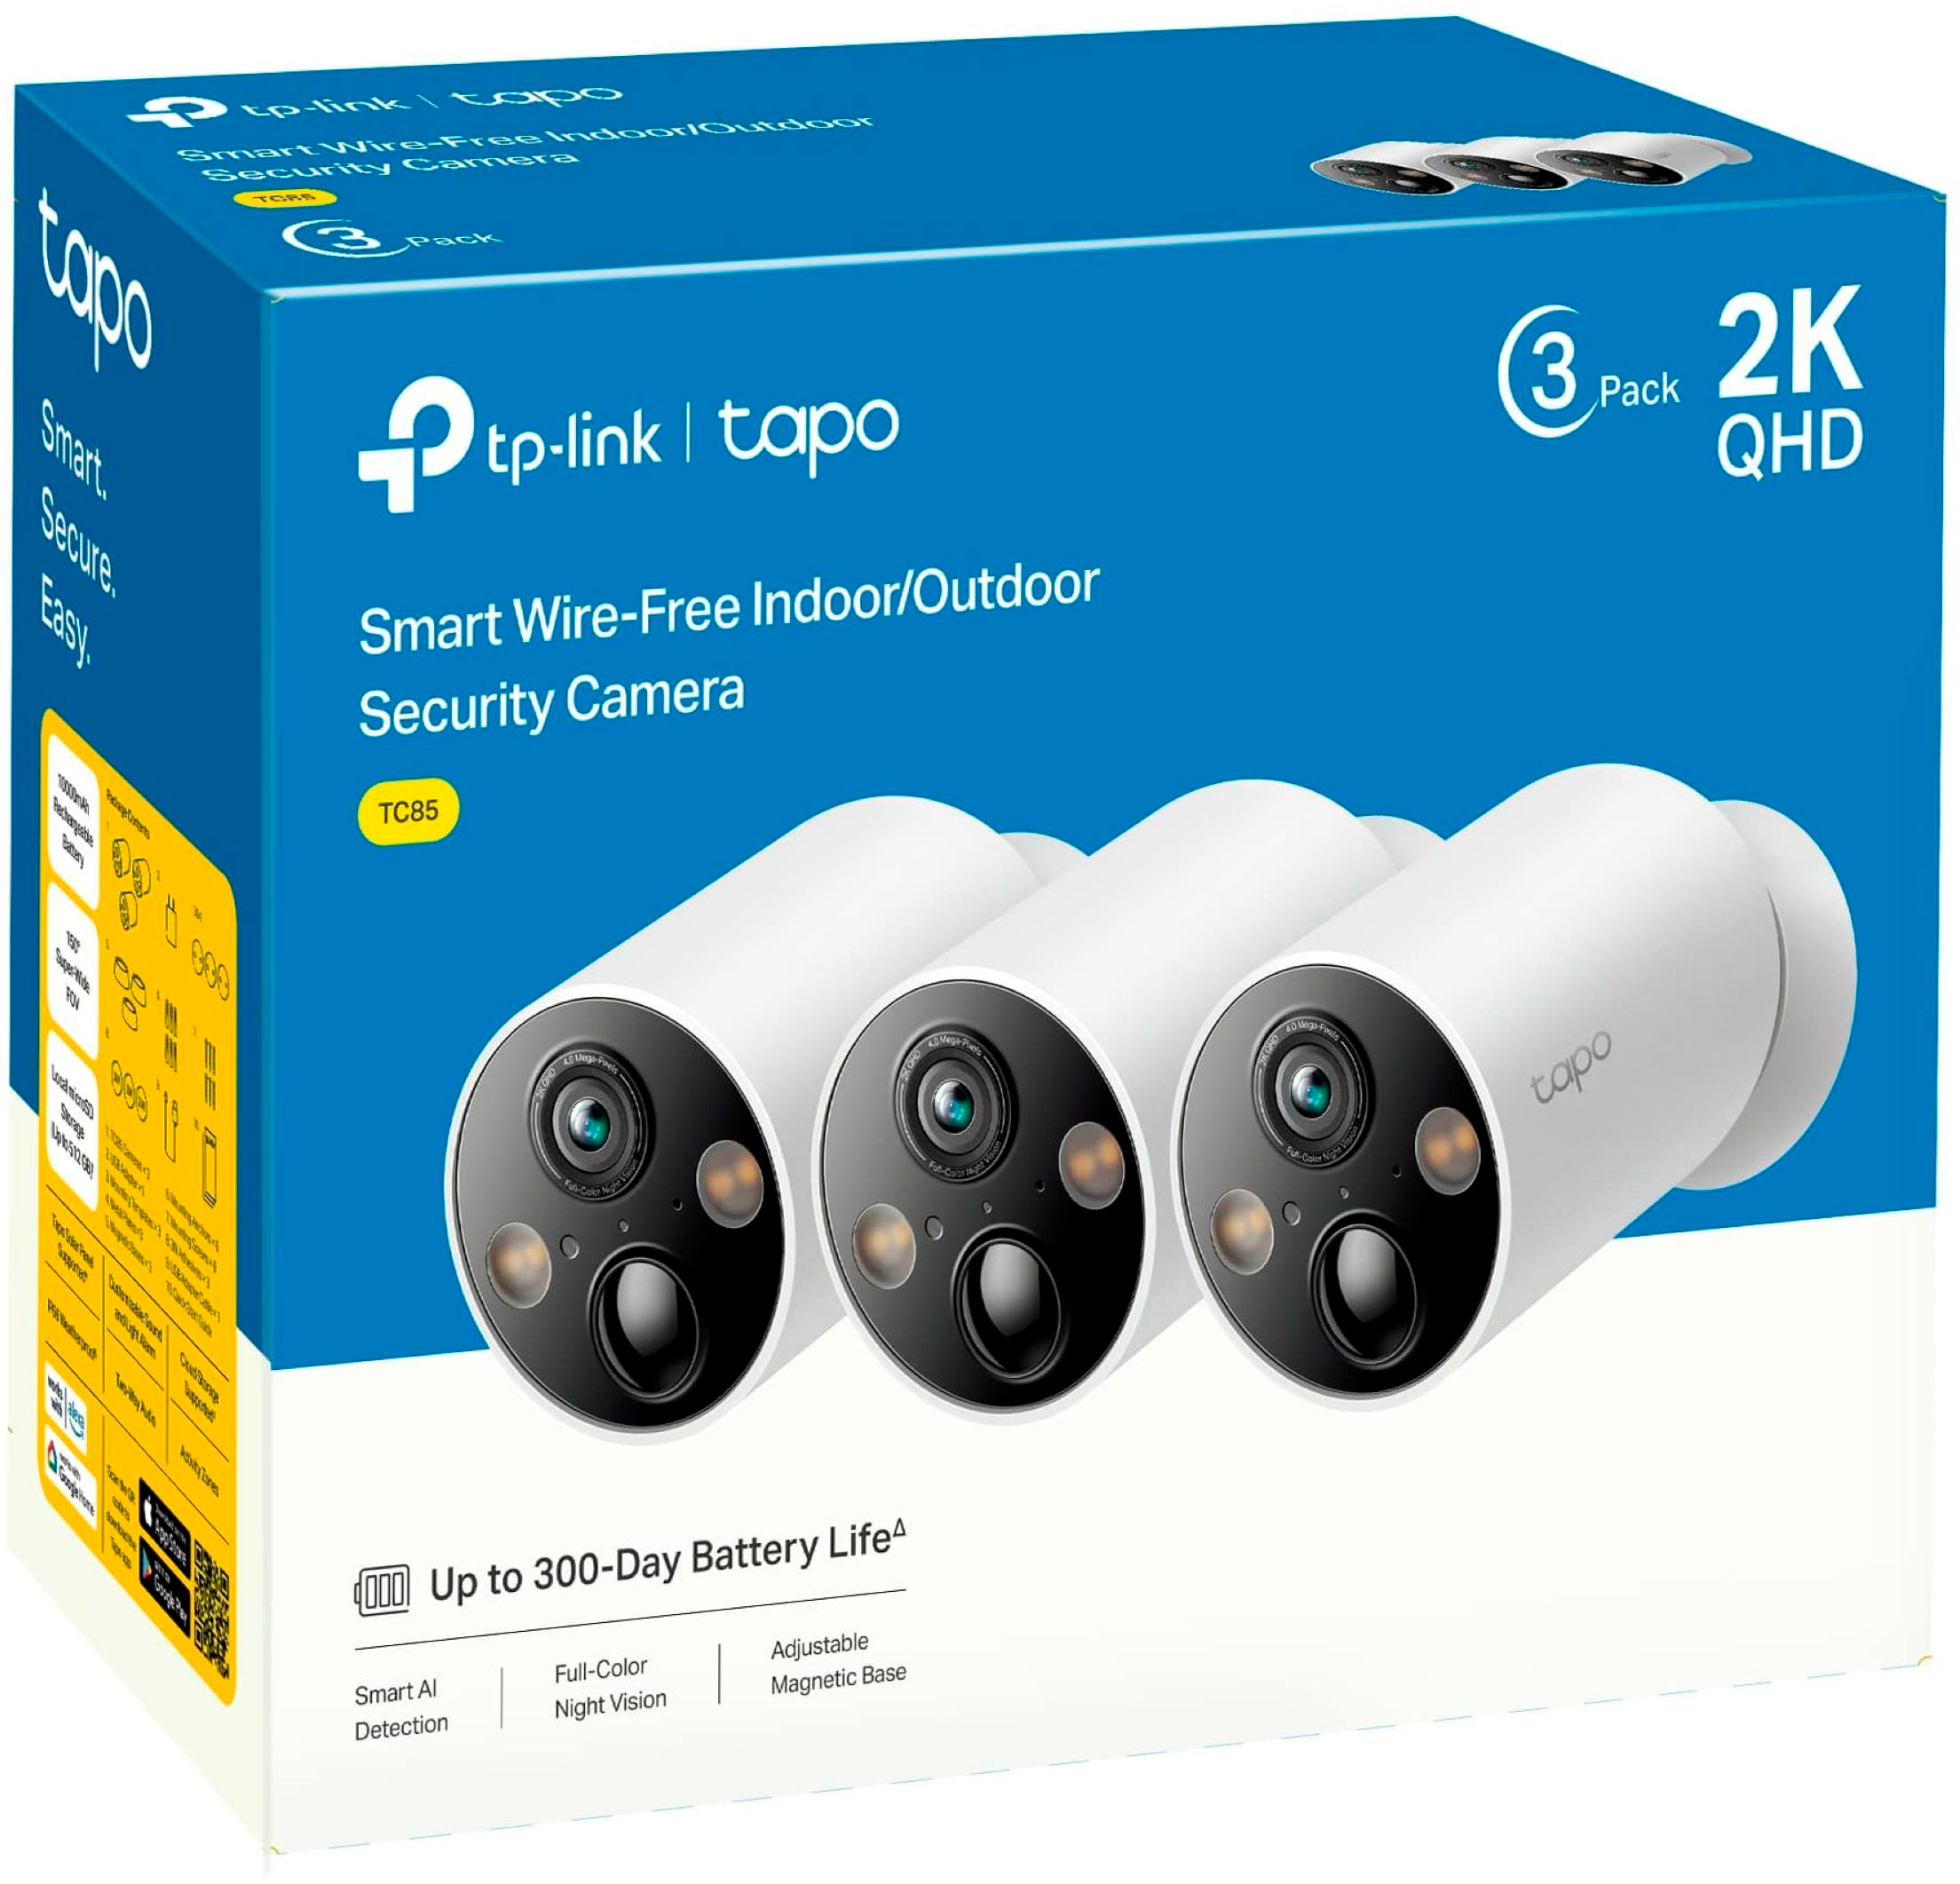 TP-Link Tapo C420S1 4MP Smart Wire-Free Security TAPO C420S1 B&H